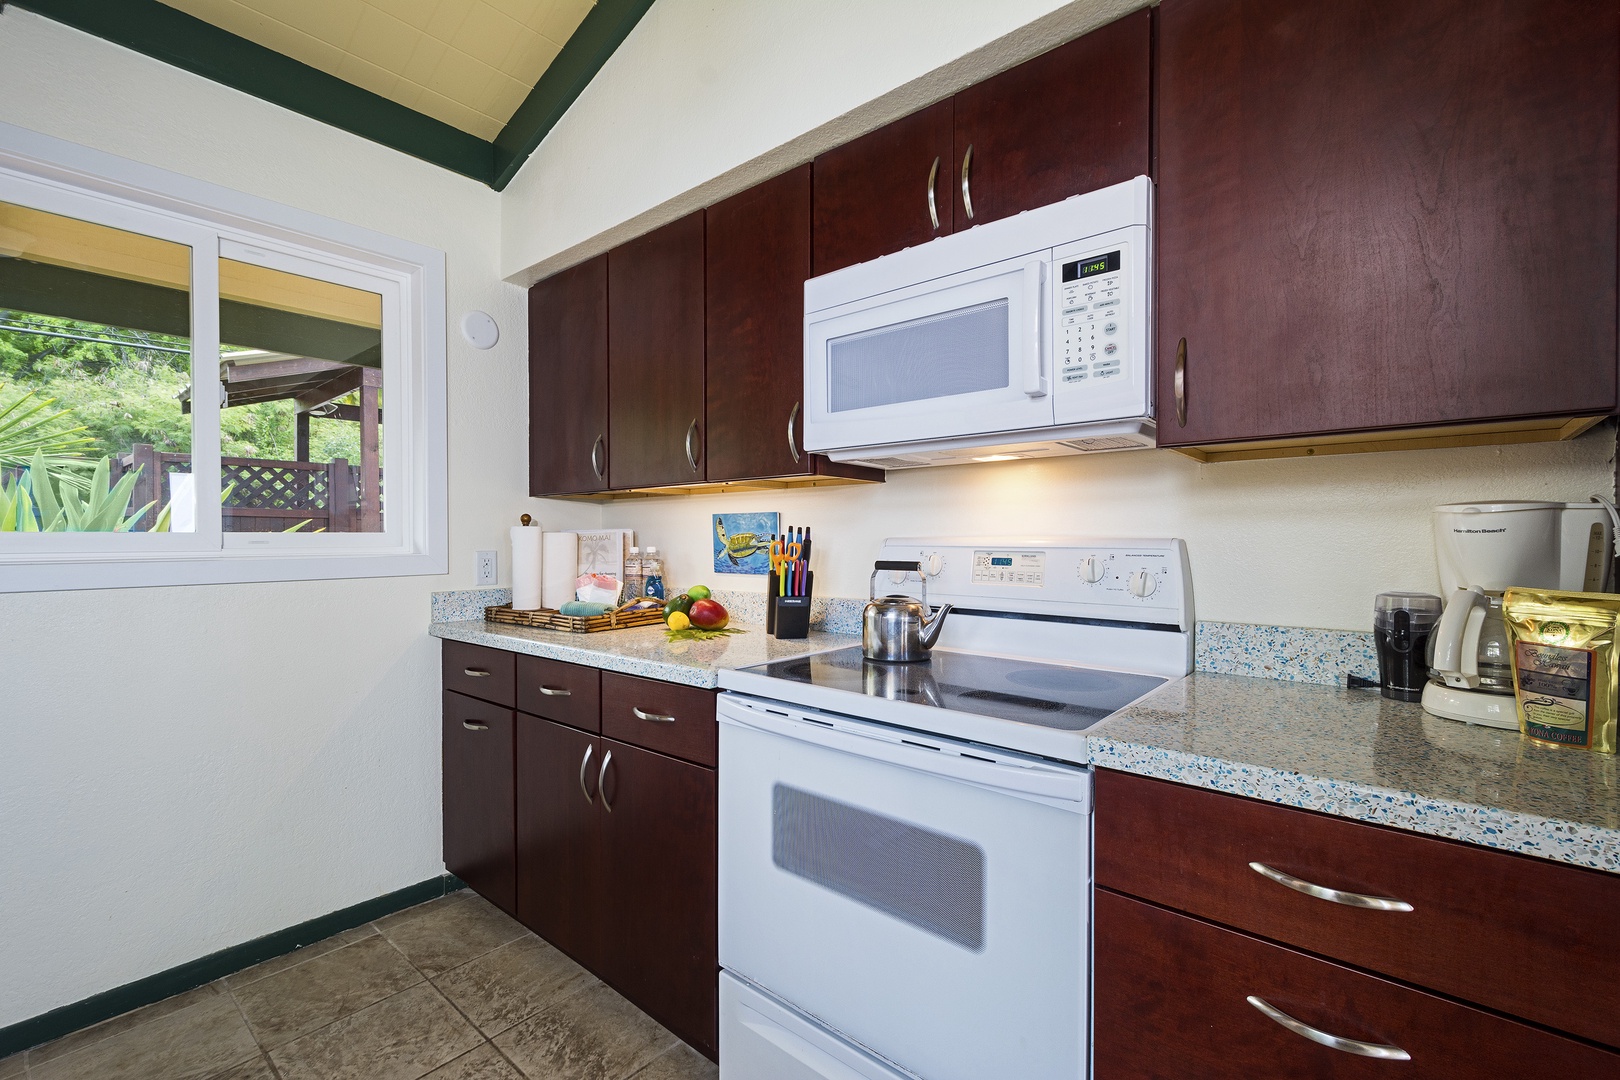 Kailua Kona Vacation Rentals, The Cottage - Open Galley style kitchen perfect for preparing meals